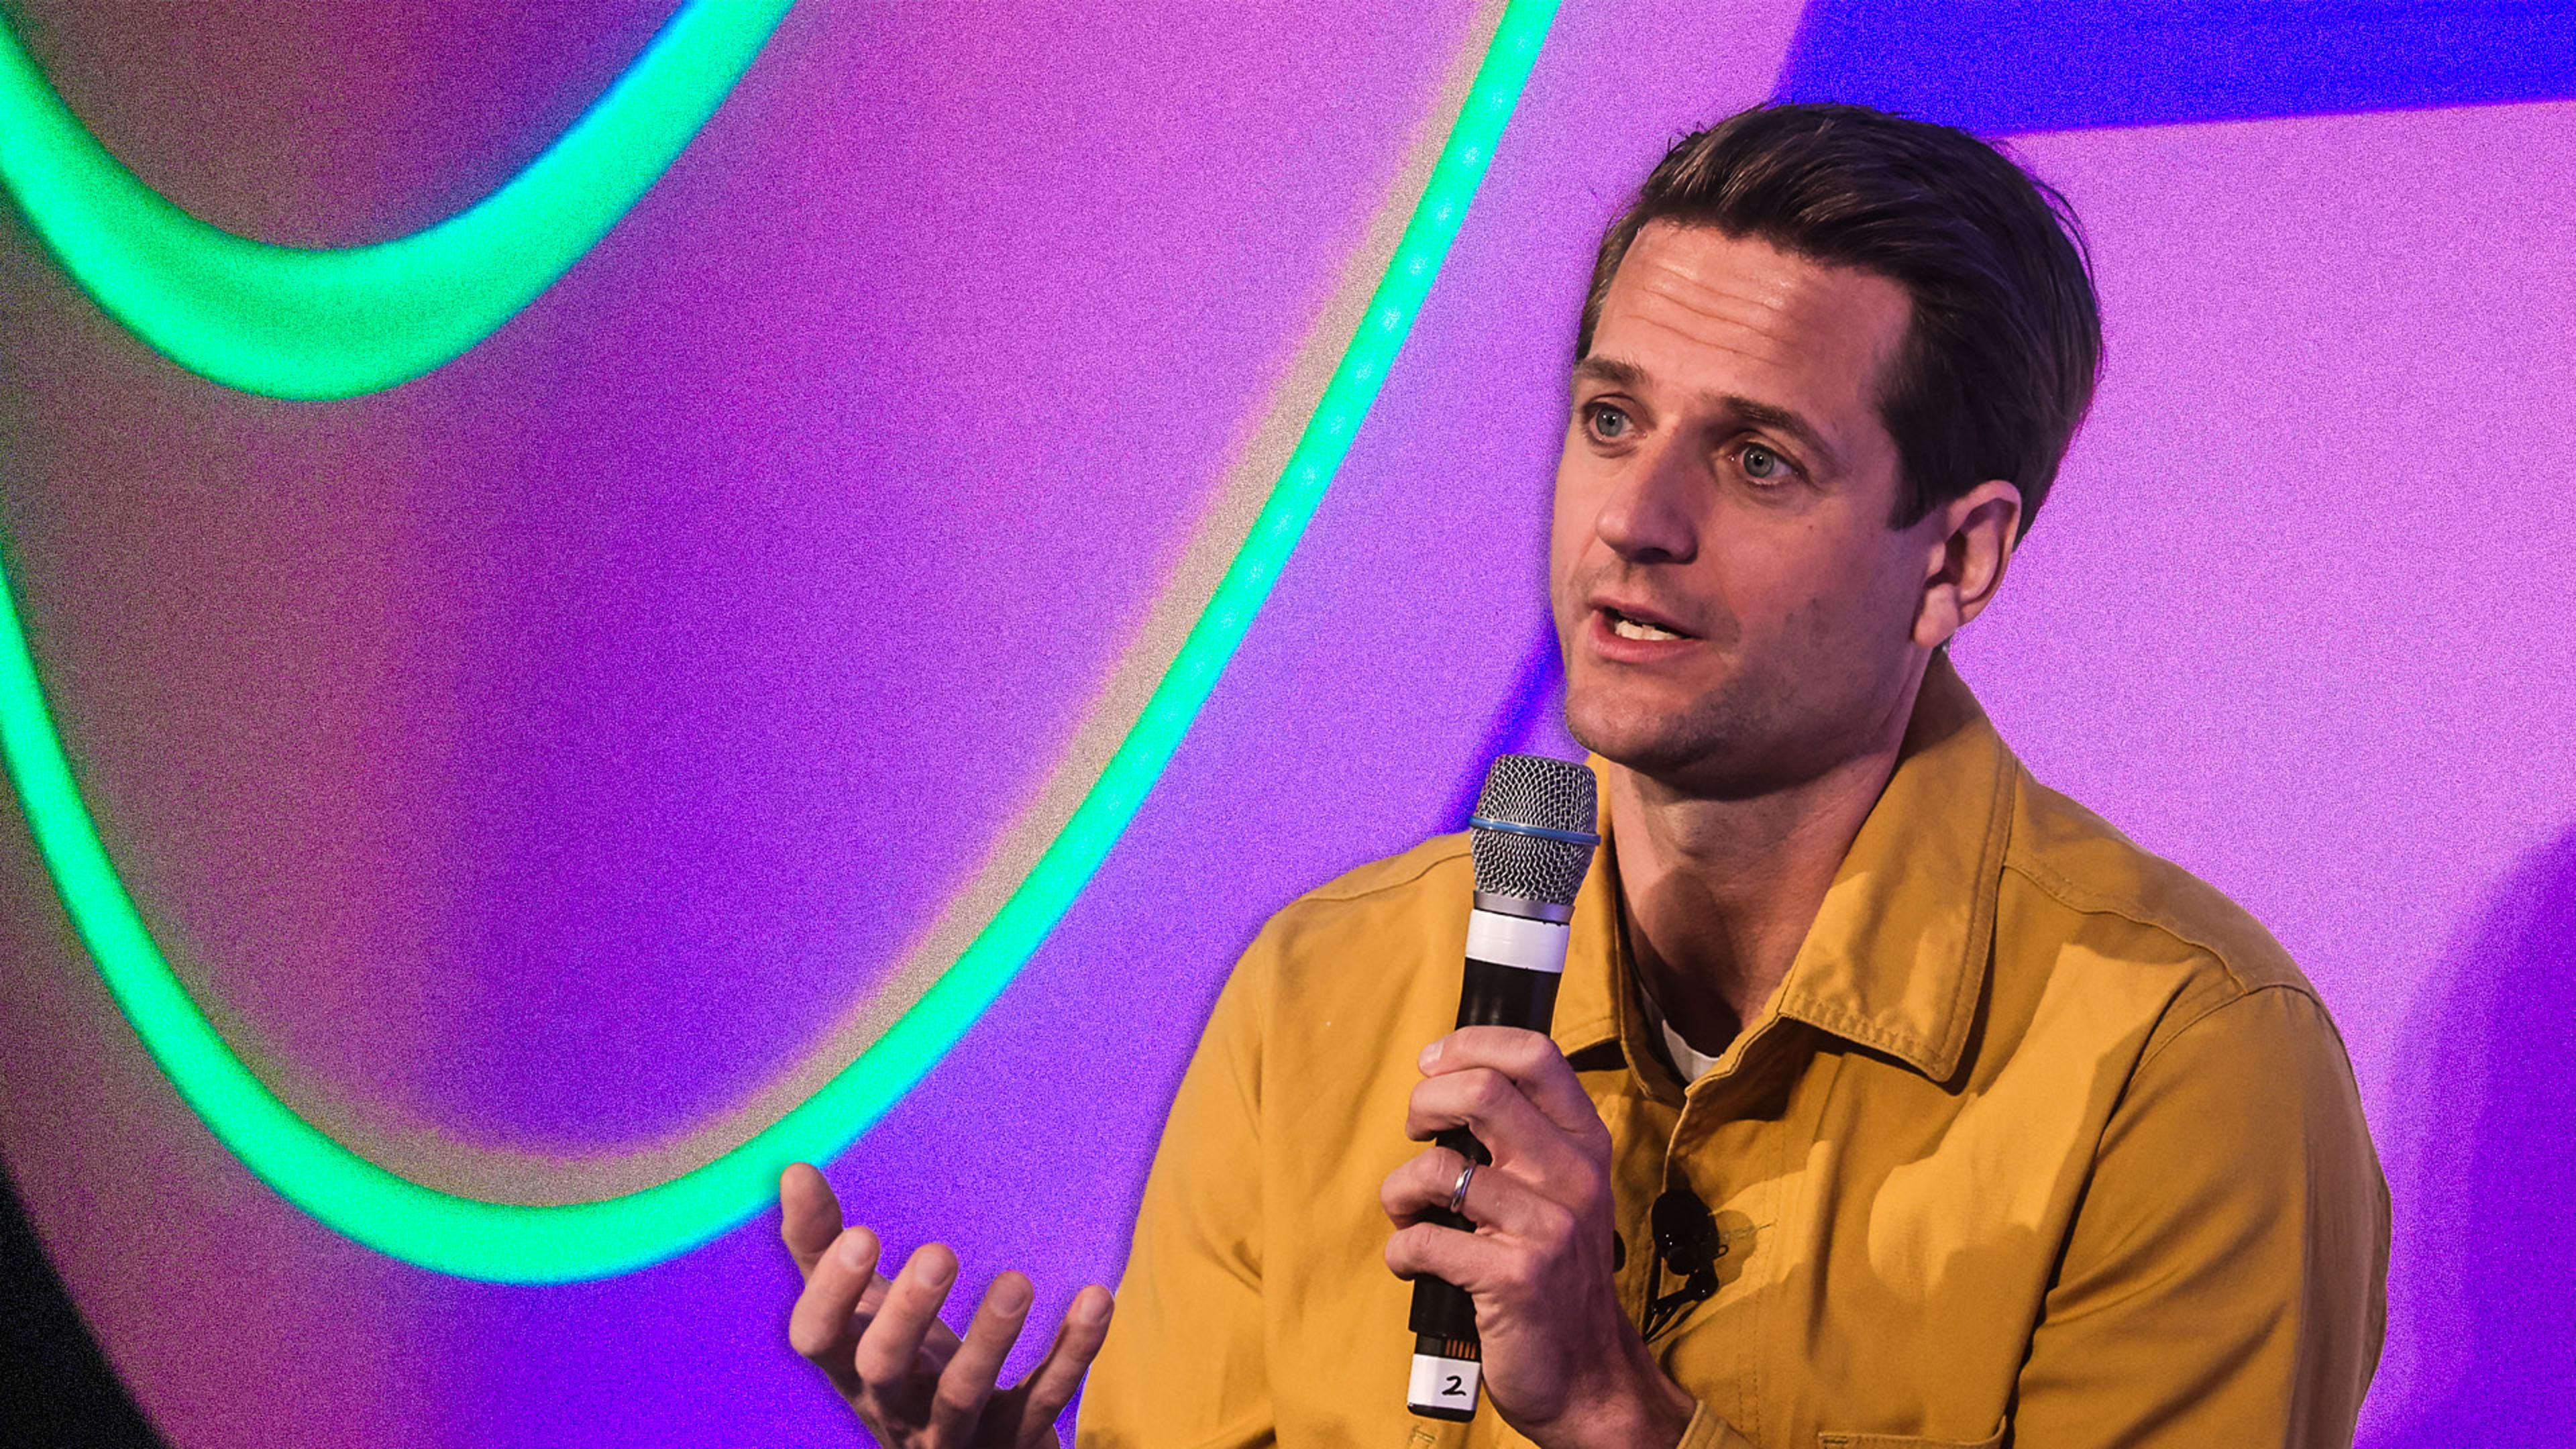 Klarna CEO: Buy now, pay later is used by shoppers who otherwise avoid credit